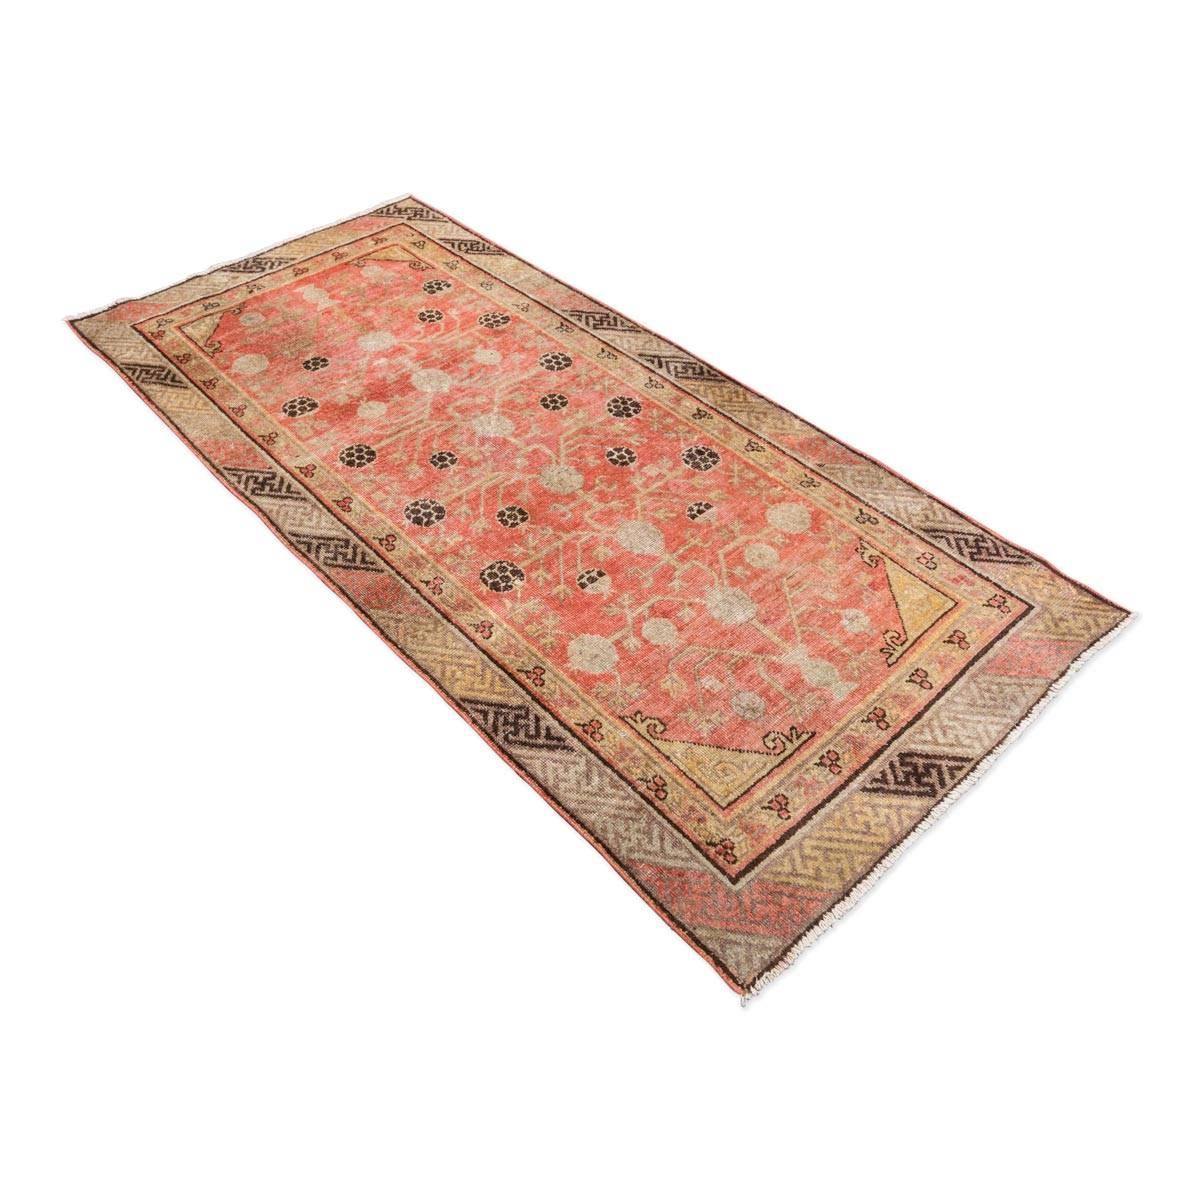 Rug of the ancient silk road. 
- Its a Samarkand with design of grenades by the central field. 
- Border of Chinese origin. 
- Use of orange, blue and gold tones. 
- Collection Item.
 